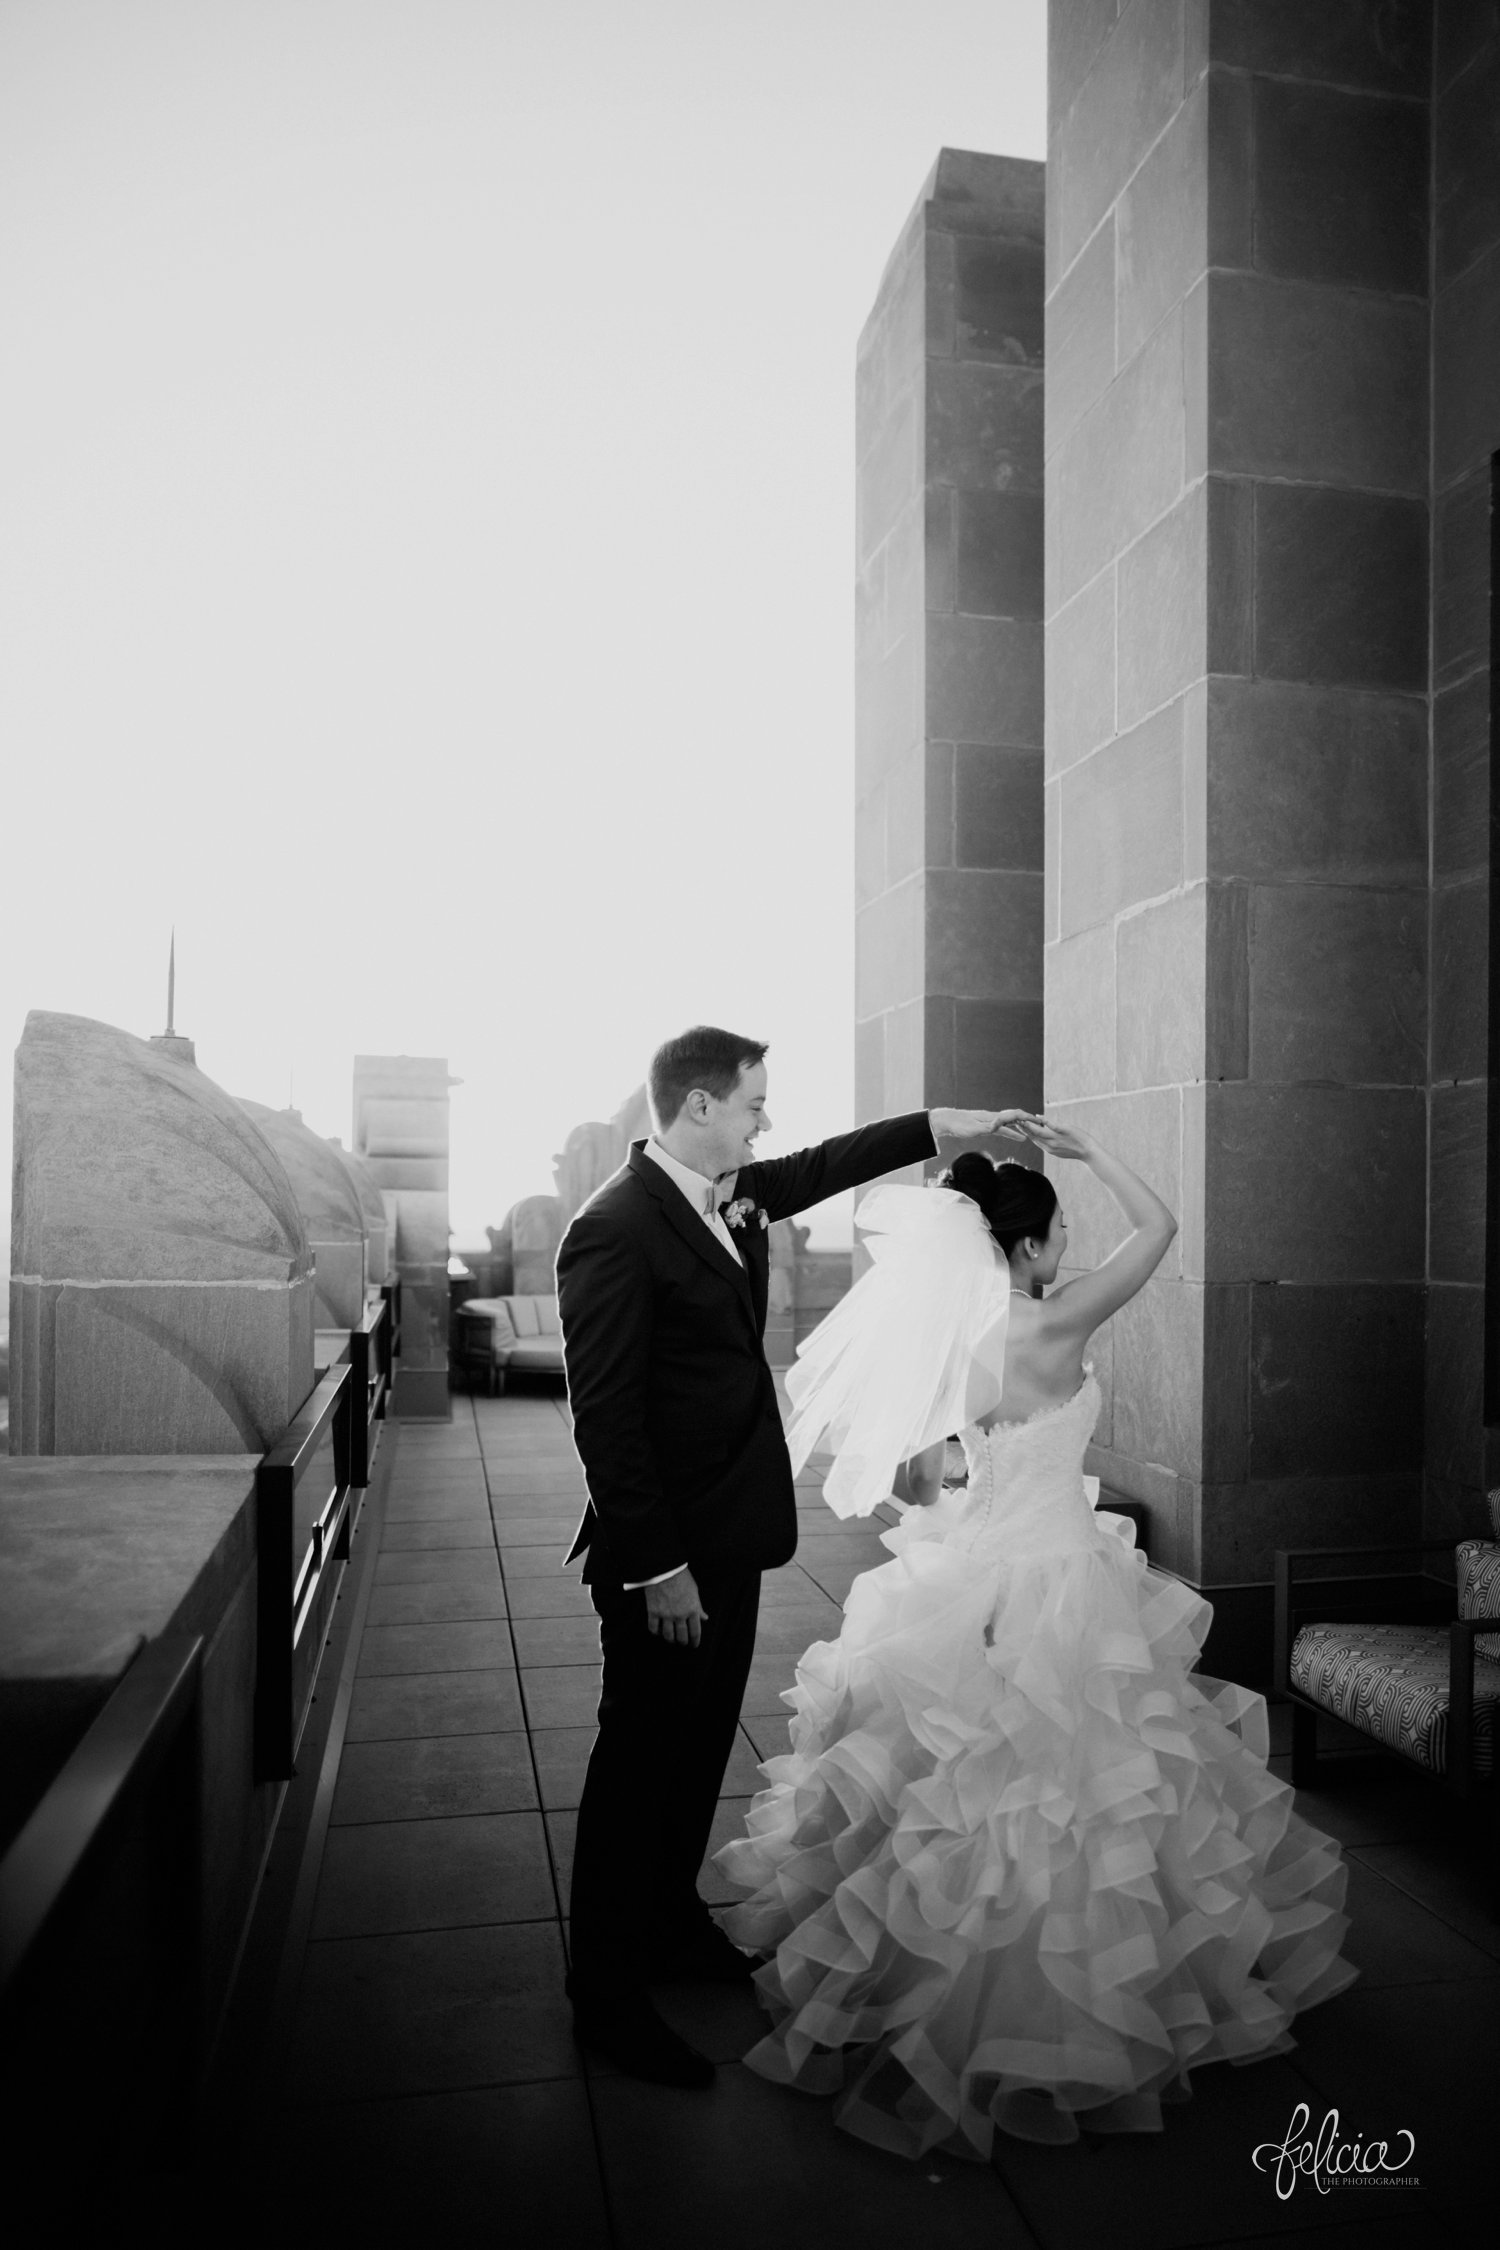 images by feliciathephotographer.com | destination wedding photographer | the grand hall at power and light | kansas city | missouri | downtown | glamorous | multicultural | black and white | couple portrait | dramatic lighting | sunset | golden hour | twirl | dance | 